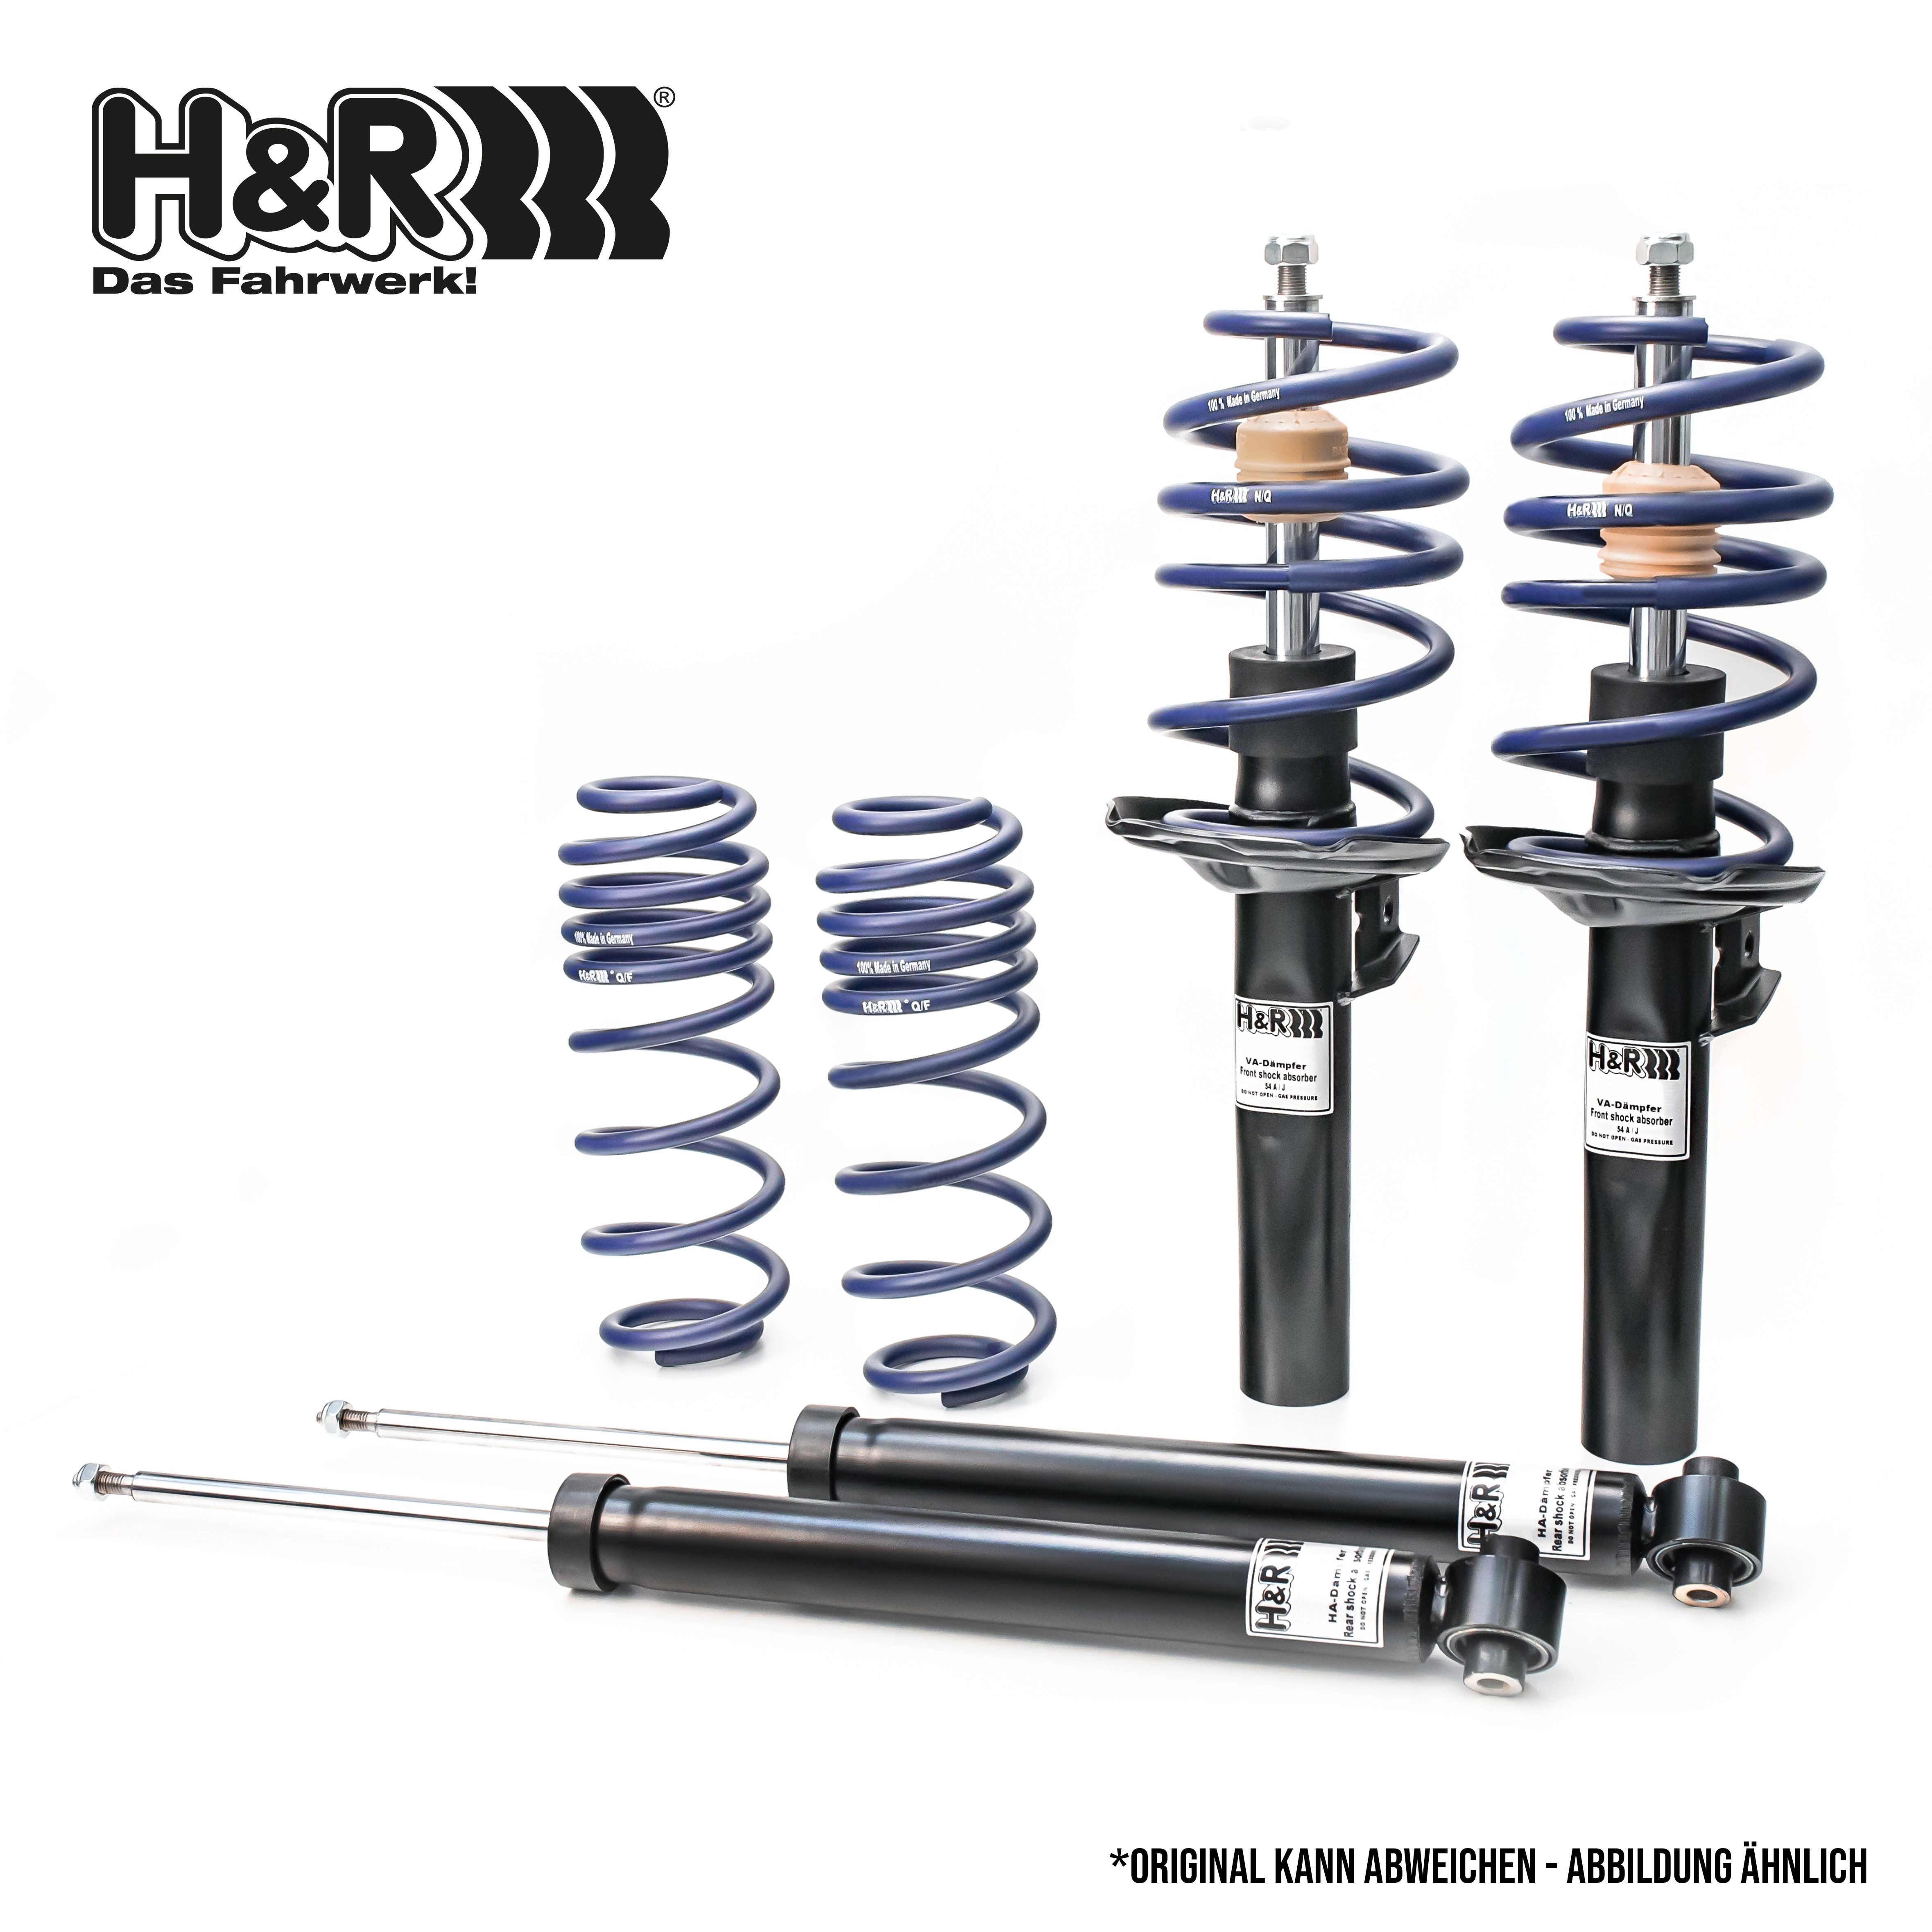 Suspension Kit, coil springs / shock absorbers 40538-2 Mercedes W211 E63AMG (211.077) 514hp 378kW MY 2007